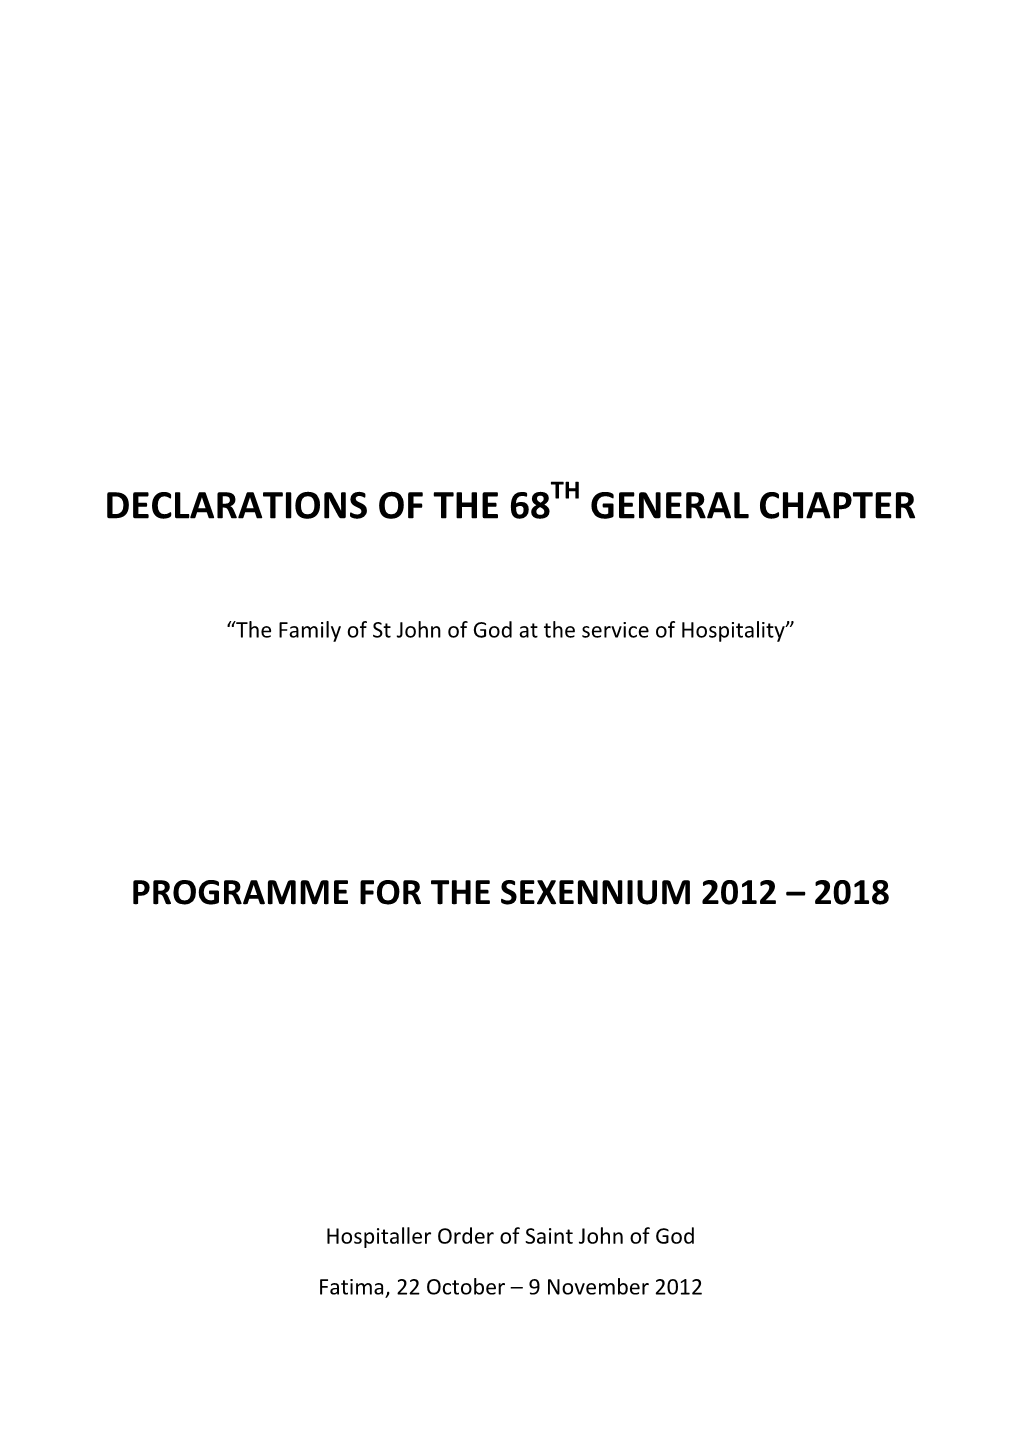 Declarations of the 68 General Chapter